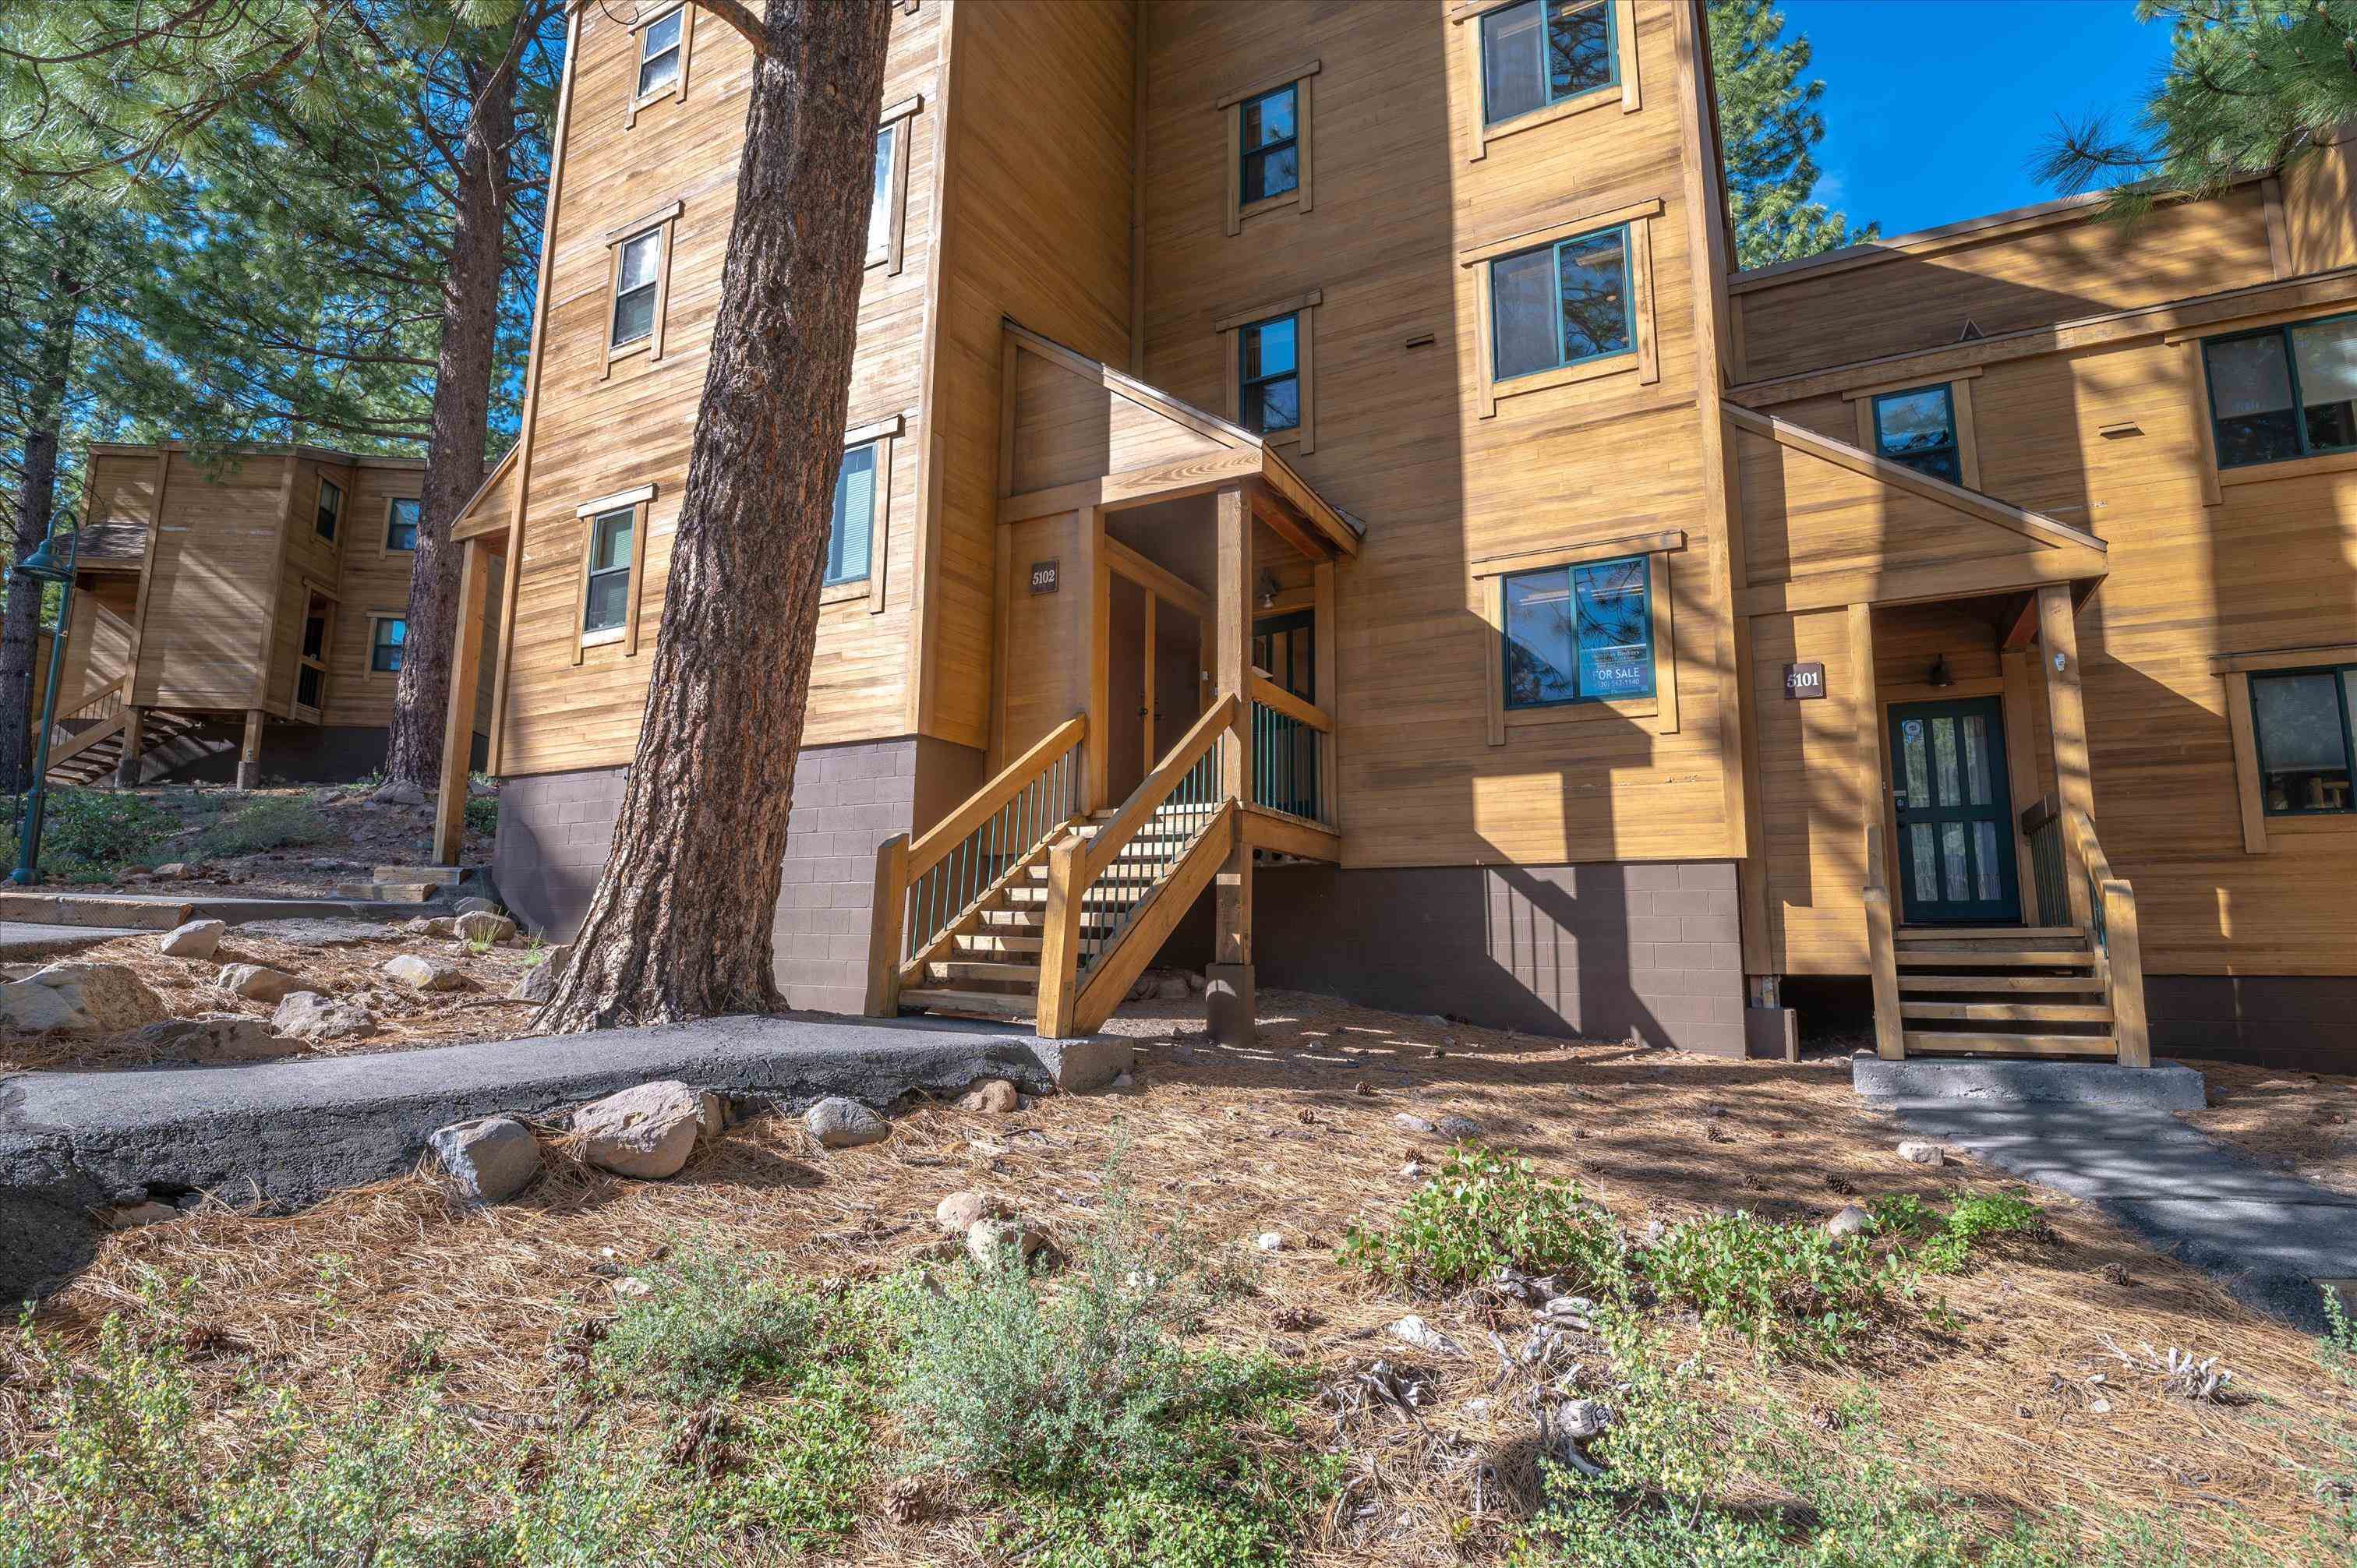 Image for 5102 Gold Bend, Truckee, CA 96161-4566